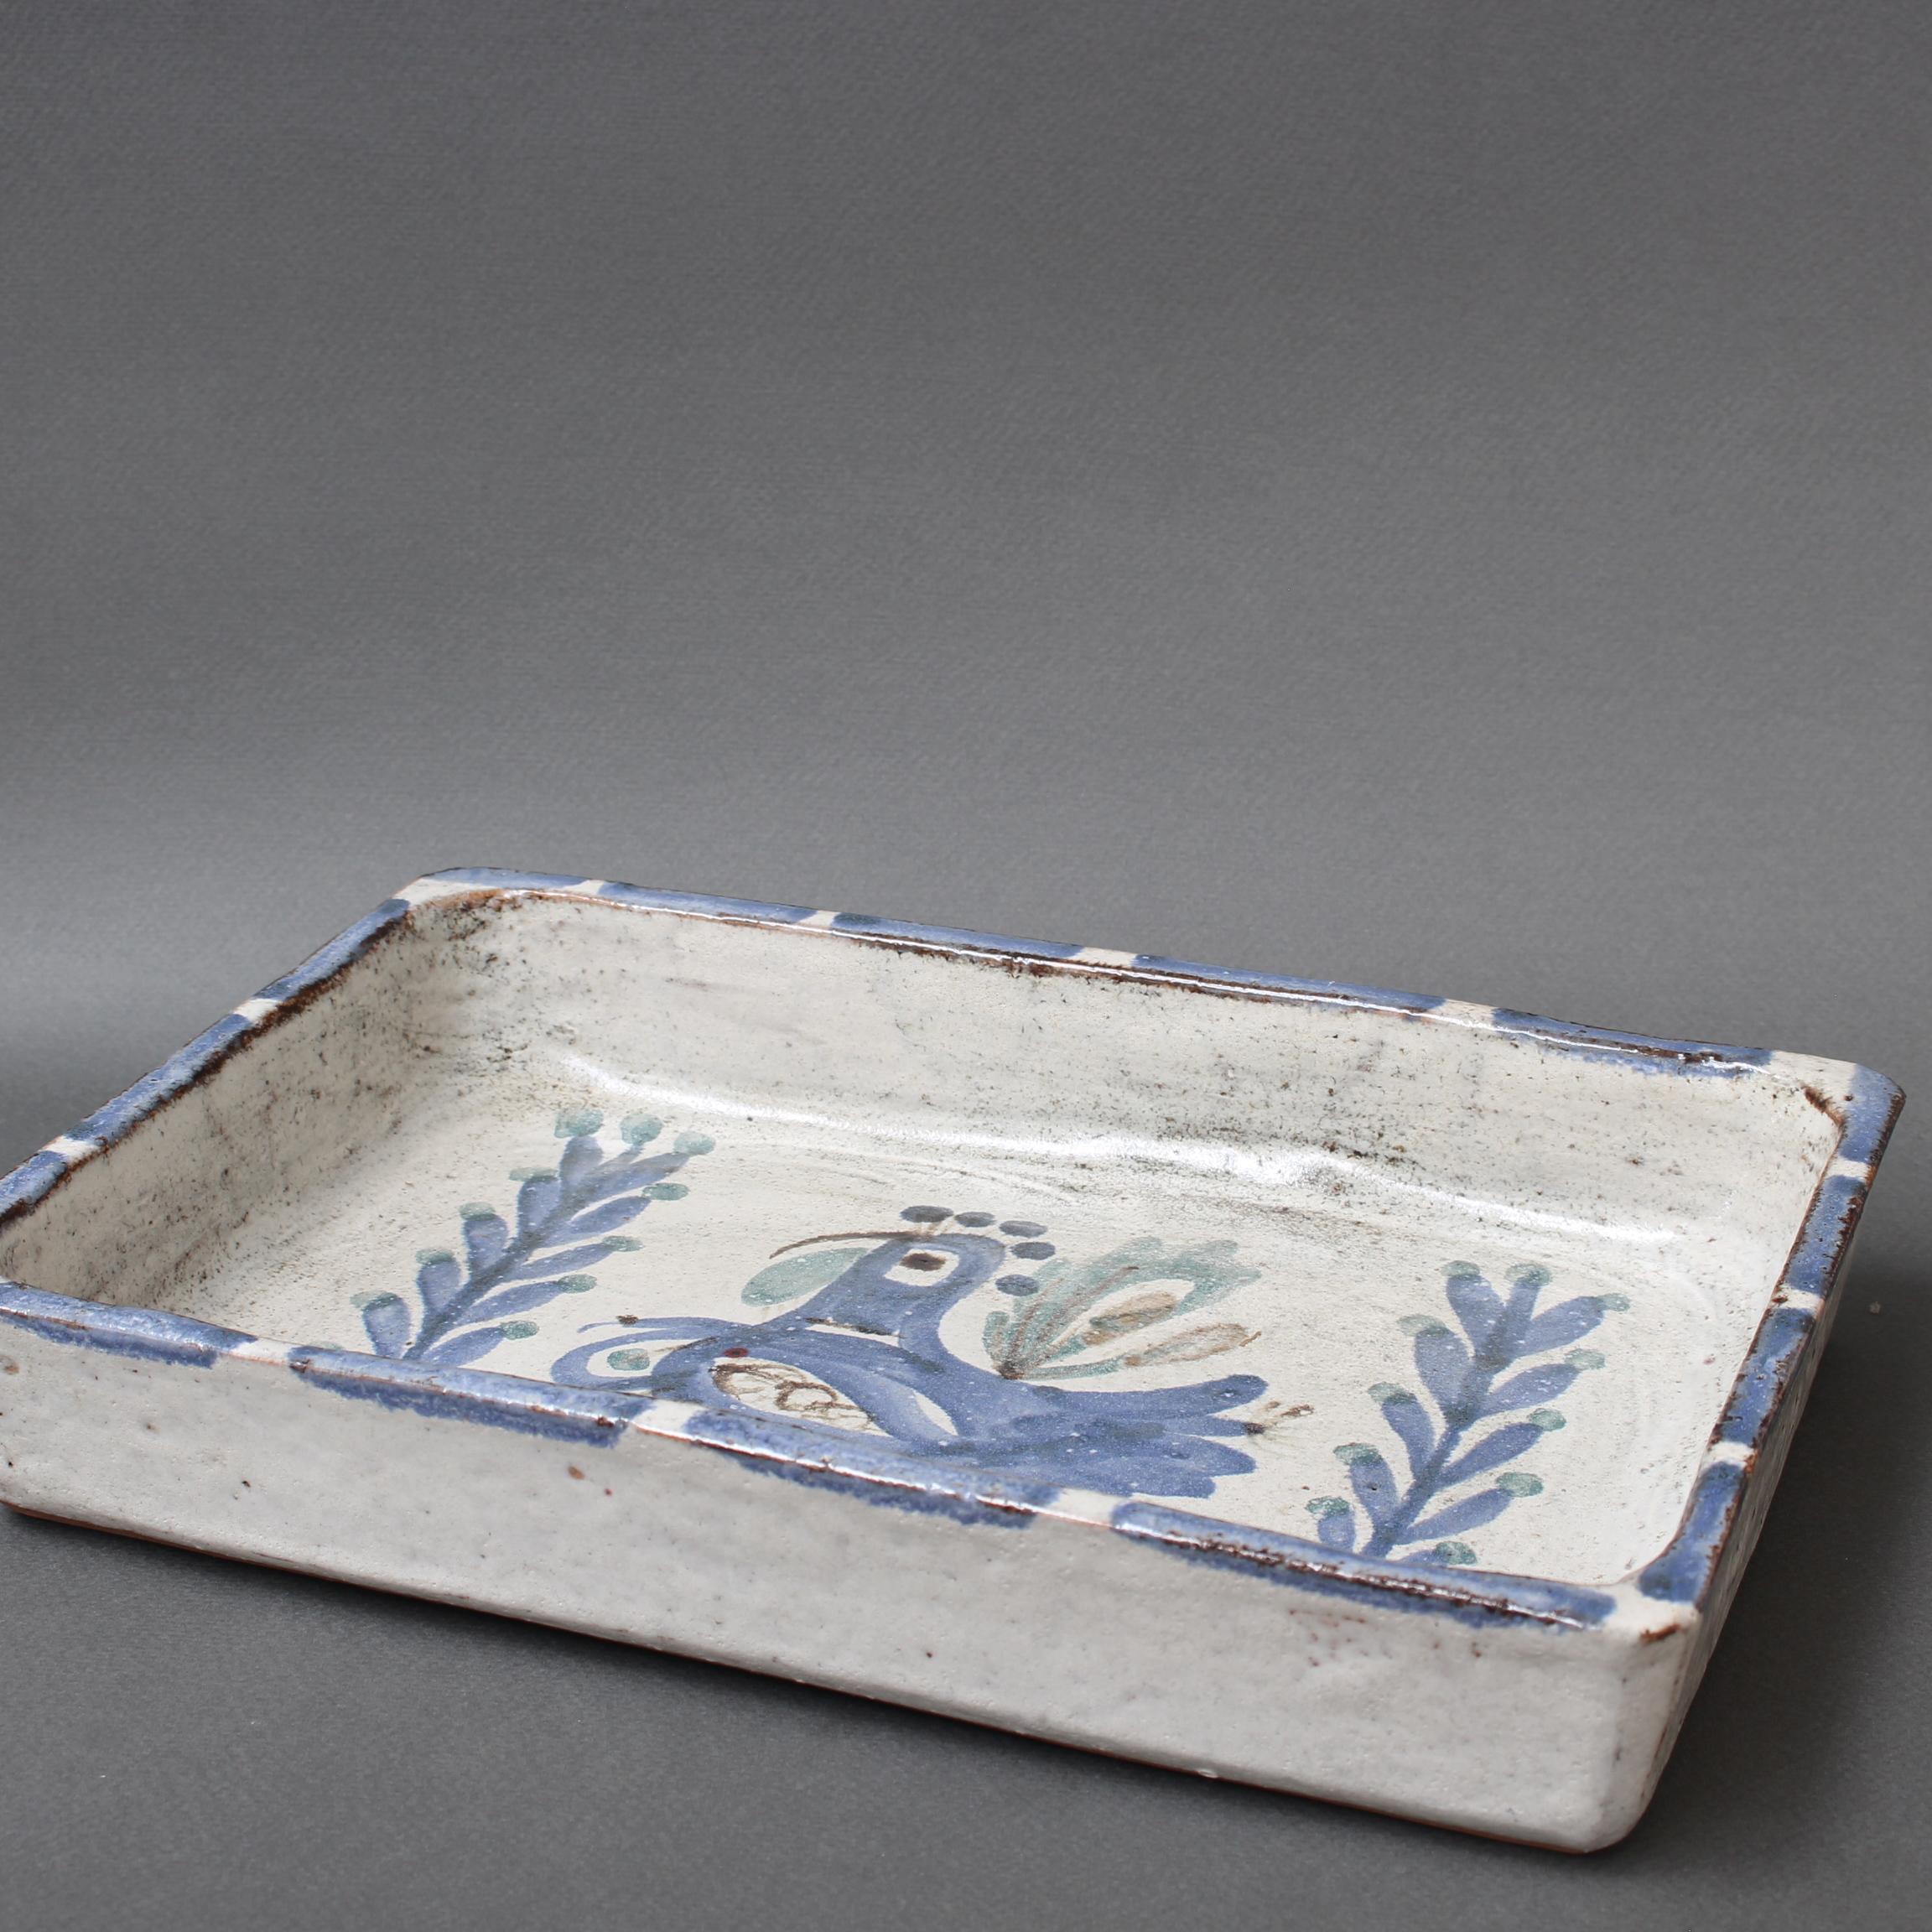 Vintage French Ceramic Tray by Gustave Reynaud for Le Mûrier (circa 1960s) For Sale 8